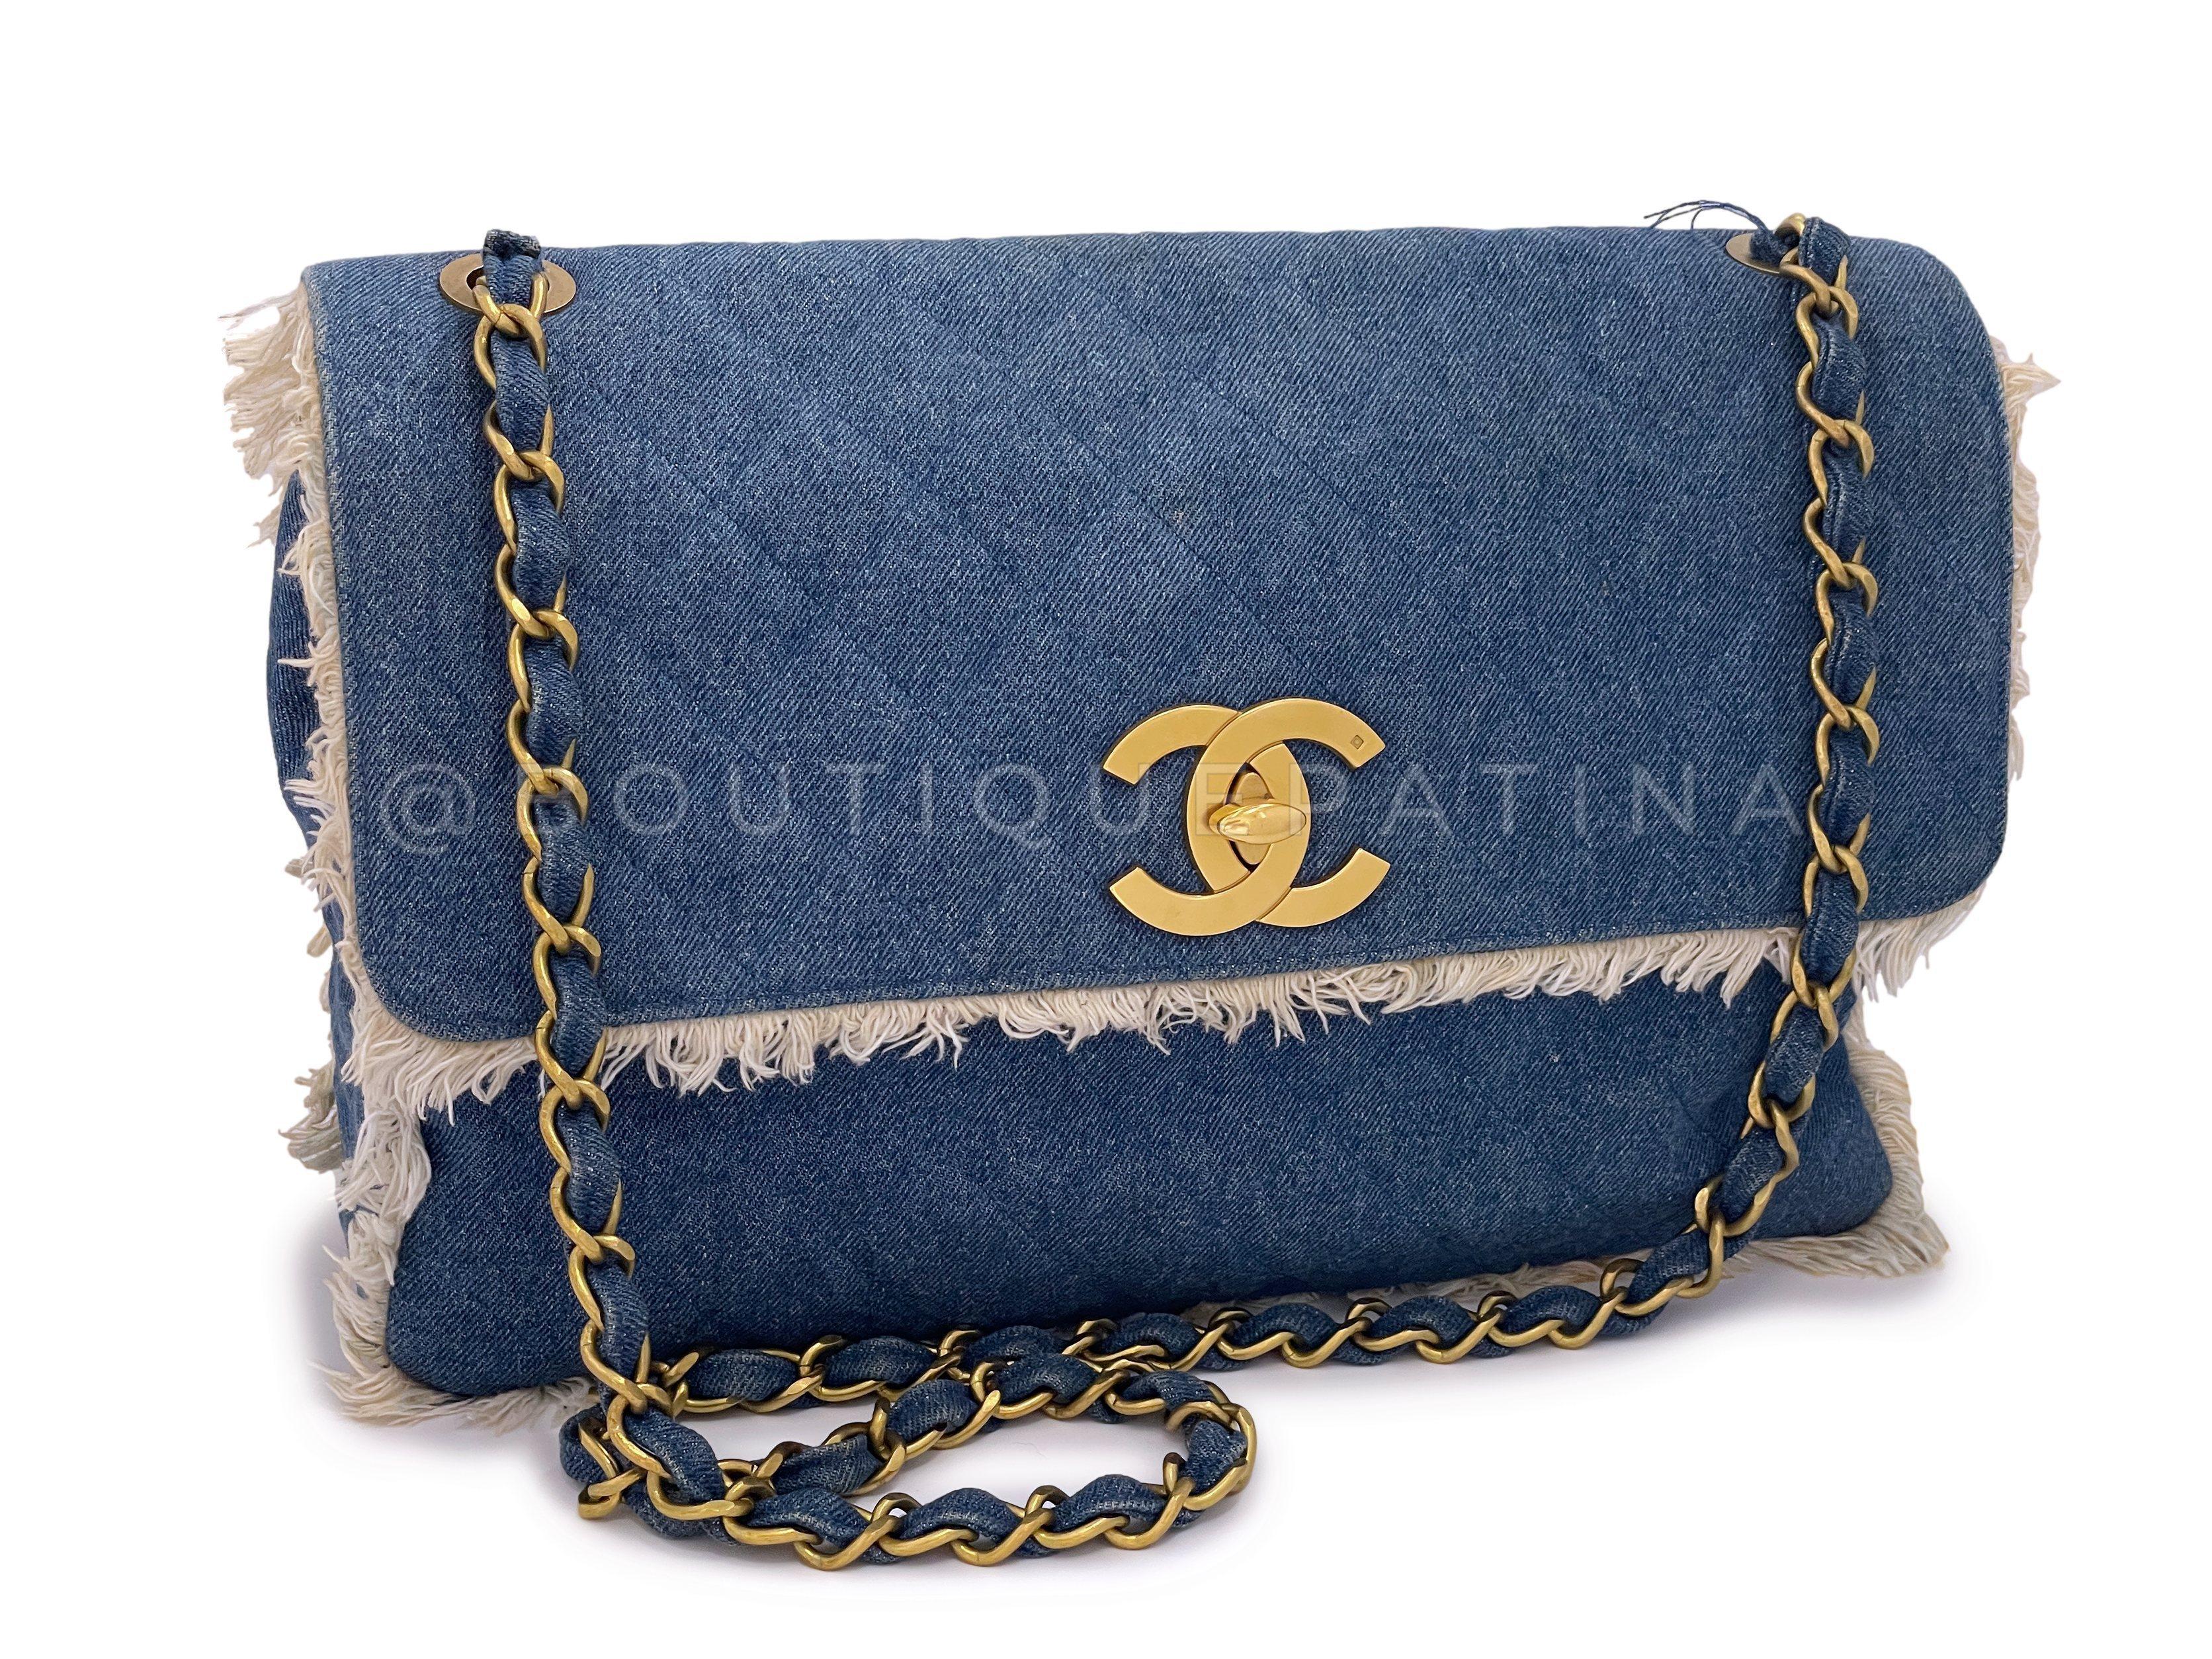 Store item: 66308


In  blue denim canvas and brushed gold hardware.  

This item is in great condition with few signs of normal use. Corners are clean with no rubbing or scuffing. Hardware is clean and shiny. Interior is clean. 
Please view all 12